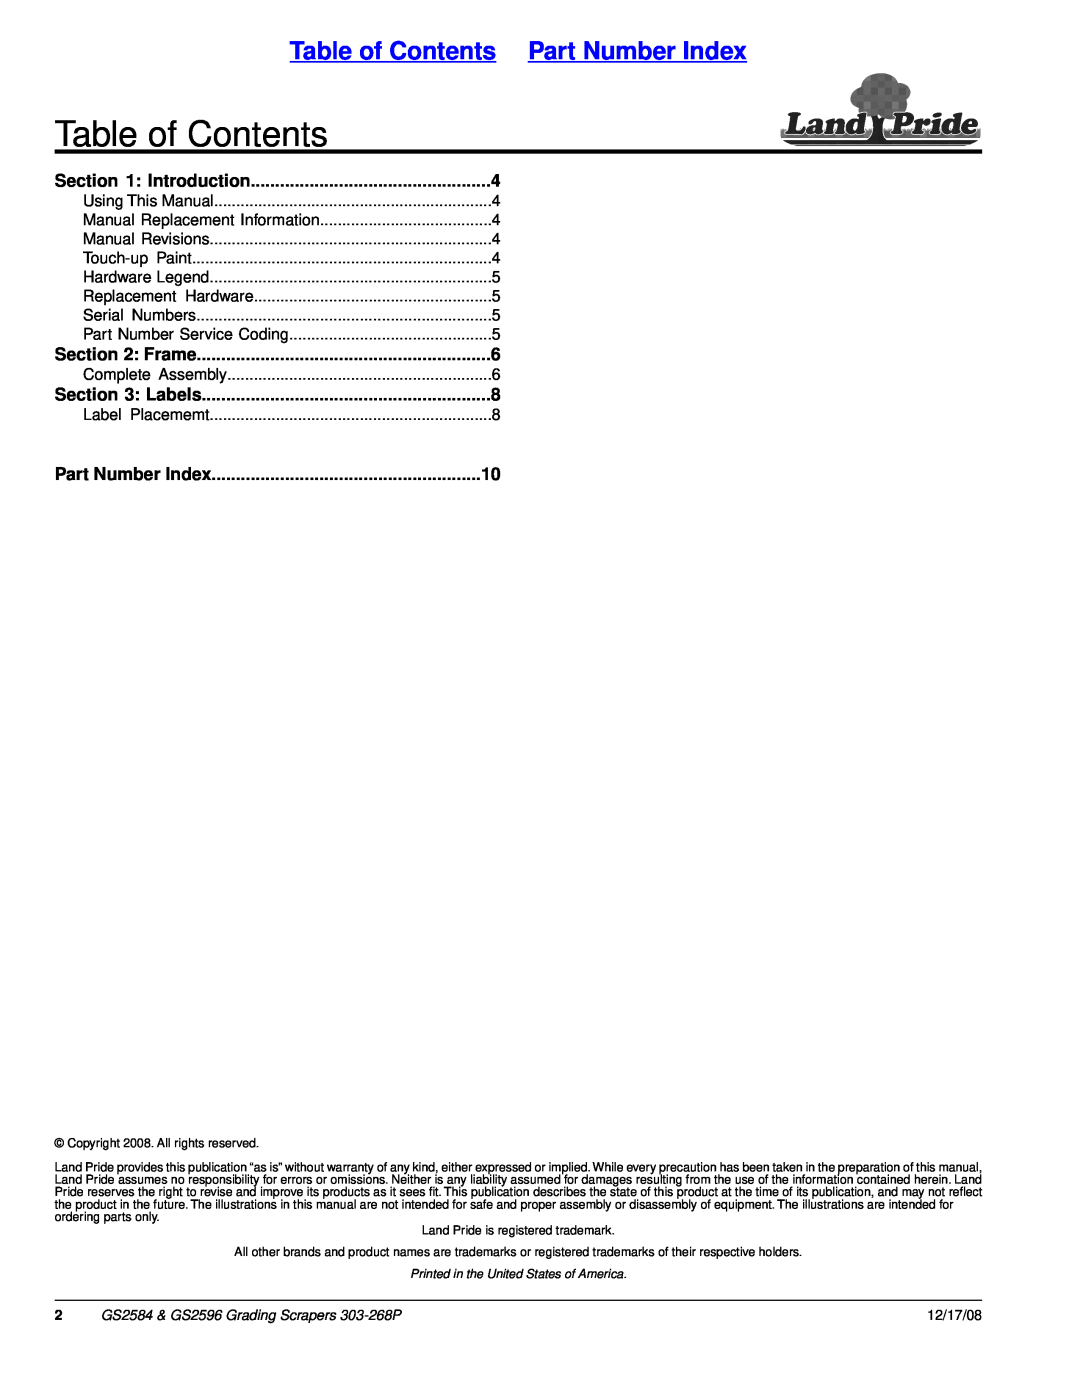 Land Pride GS2596, GS2584 manual Table of Contents Part Number Index, Introduction, Frame, Labels 